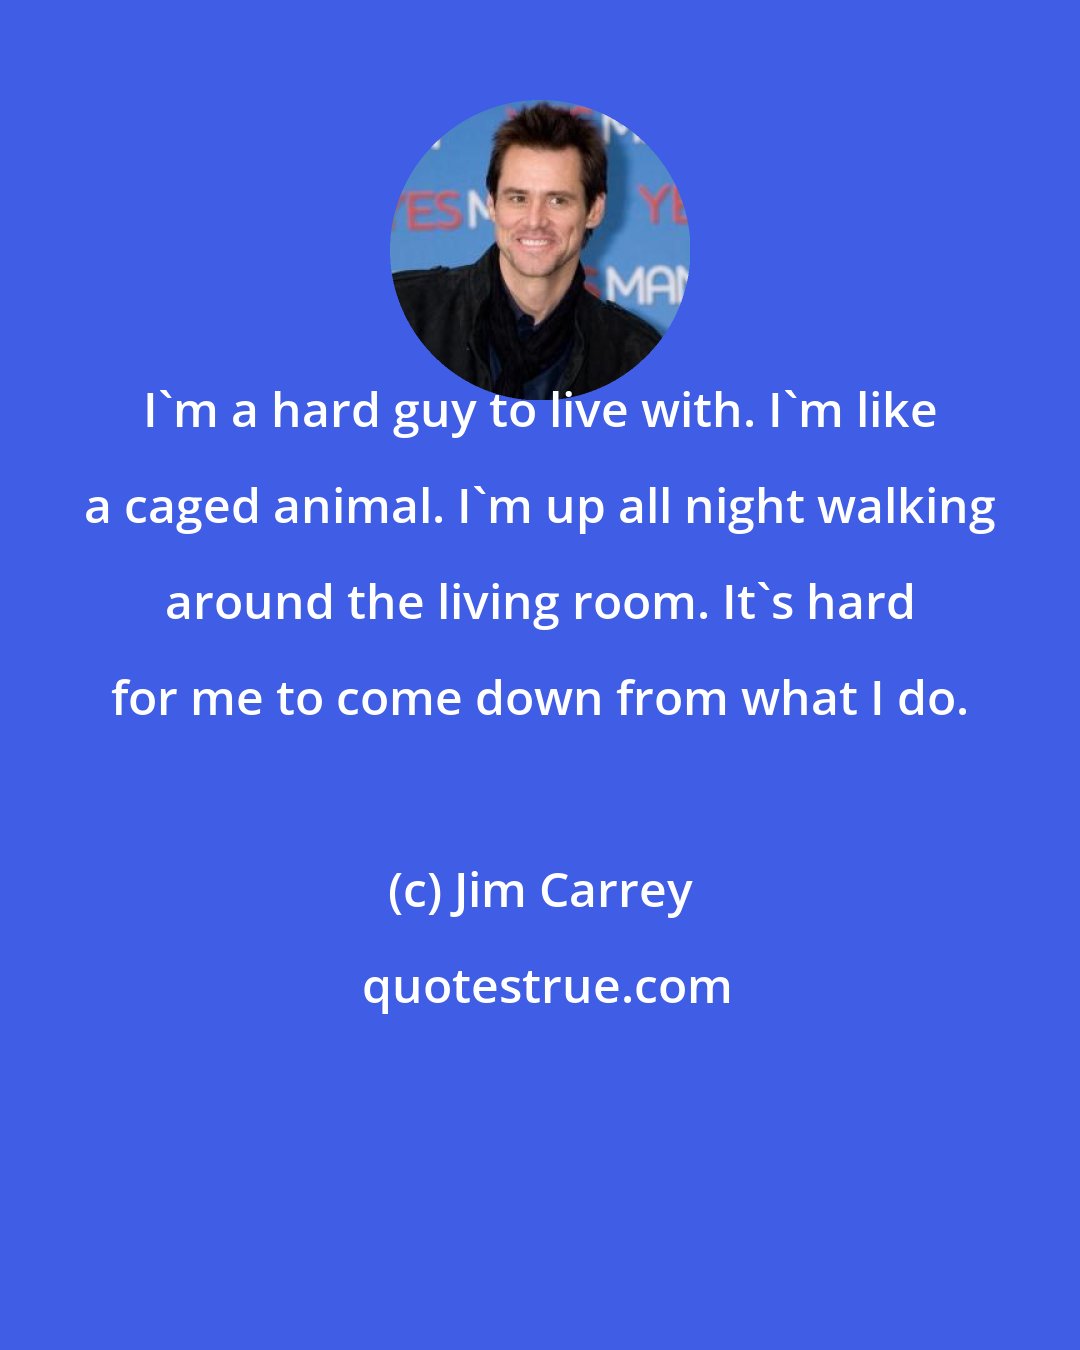 Jim Carrey: I'm a hard guy to live with. I'm like a caged animal. I'm up all night walking around the living room. It's hard for me to come down from what I do.